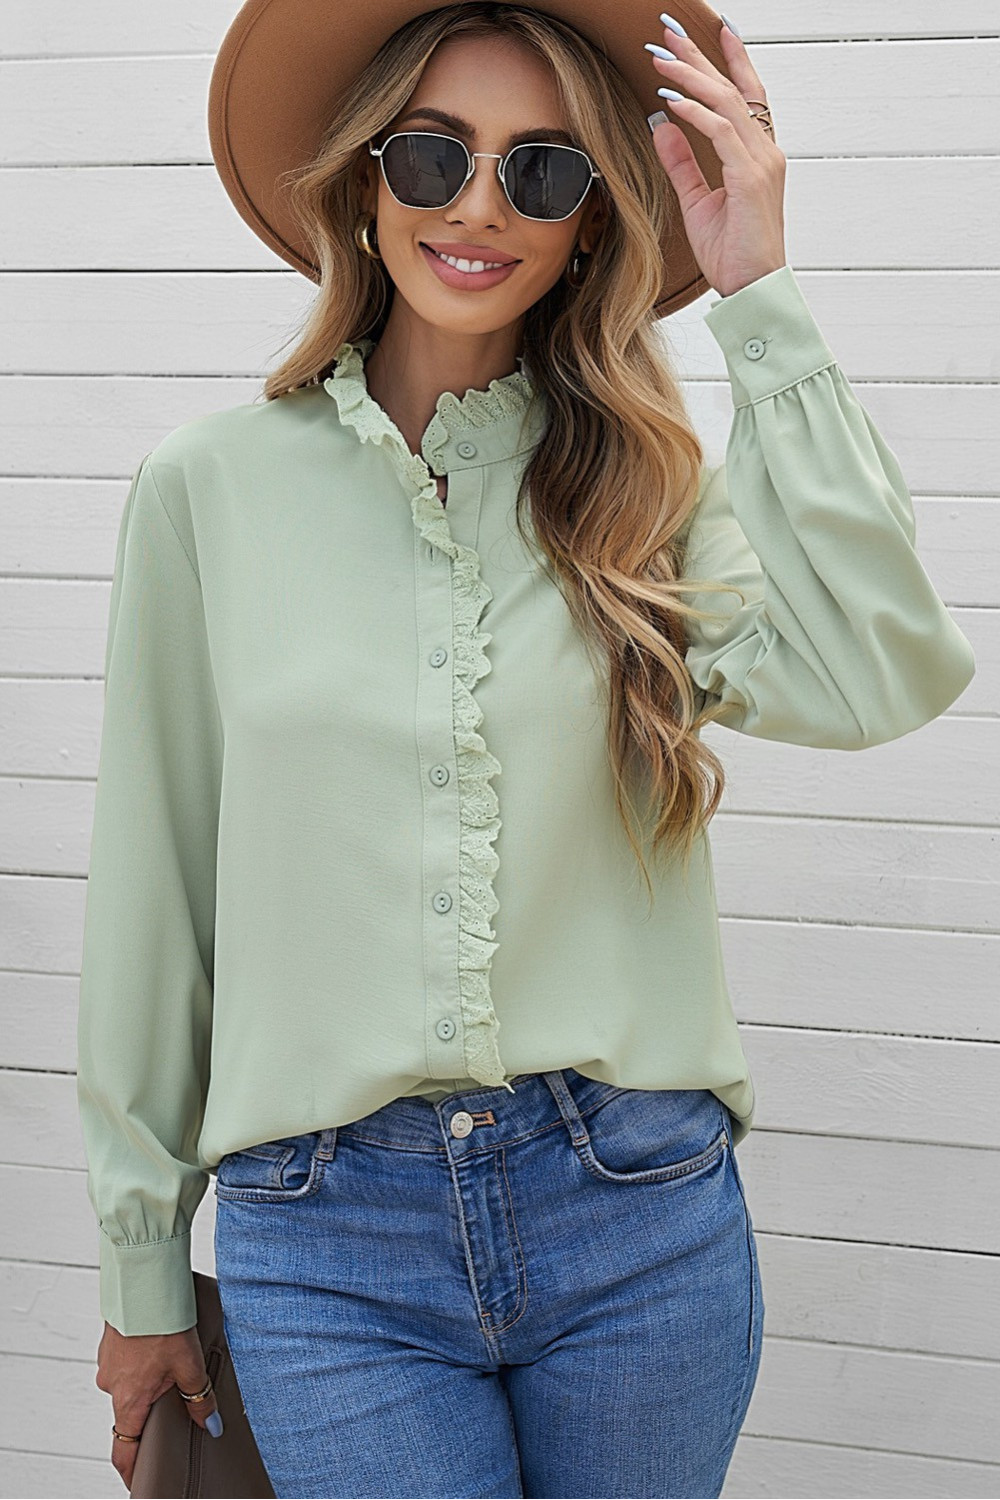 Flowing green blouse